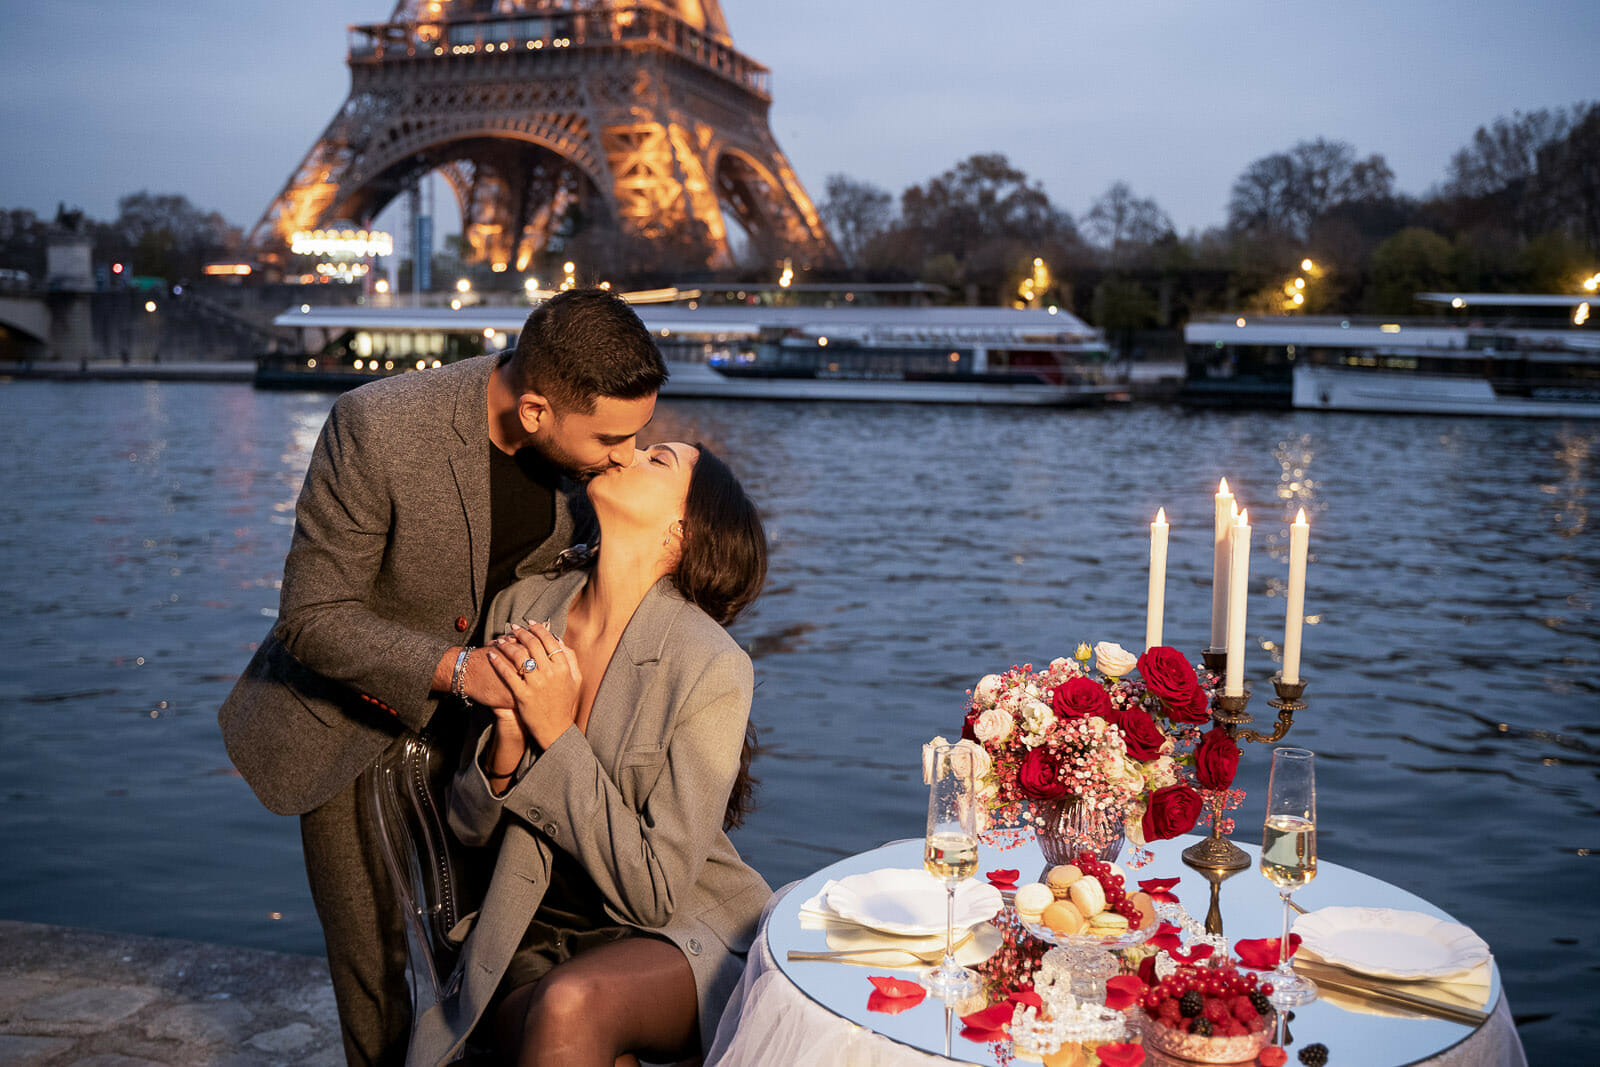 Paris proposal photos taken at night in front of the Eiffel Tower